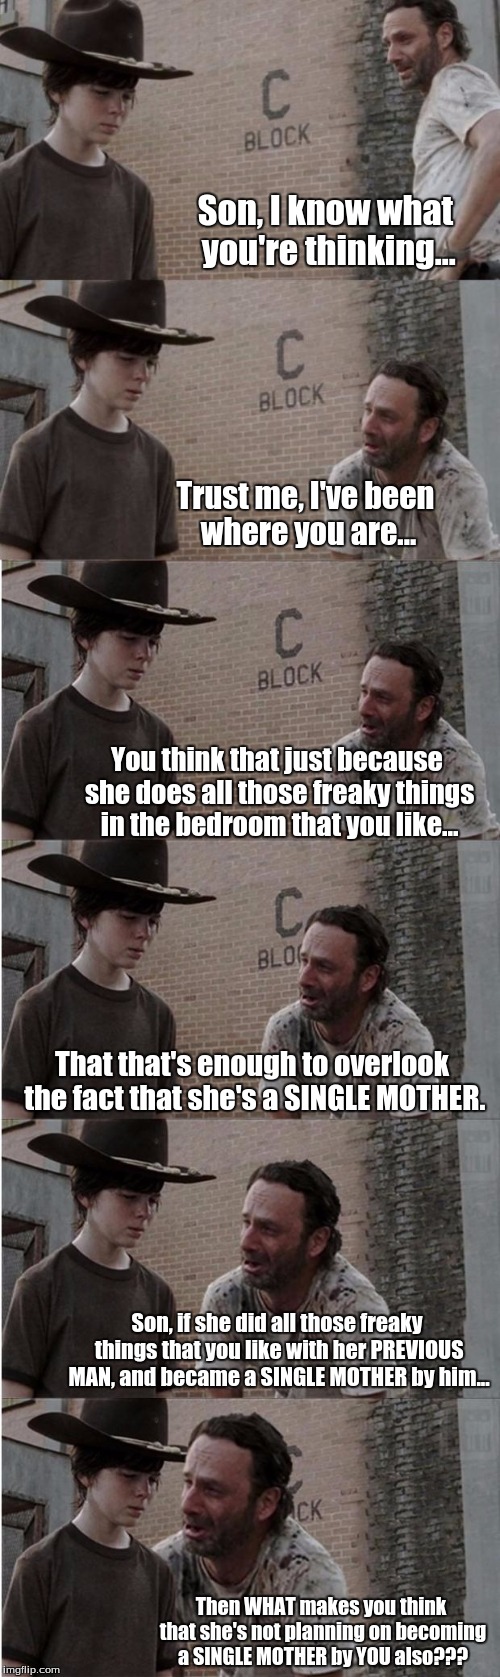 Rick and Carl Longer | Son, I know what you're thinking... Then WHAT makes you think that she's not planning on becoming a SINGLE MOTHER by YOU also??? Trust me, I | image tagged in memes,rick and carl longer | made w/ Imgflip meme maker